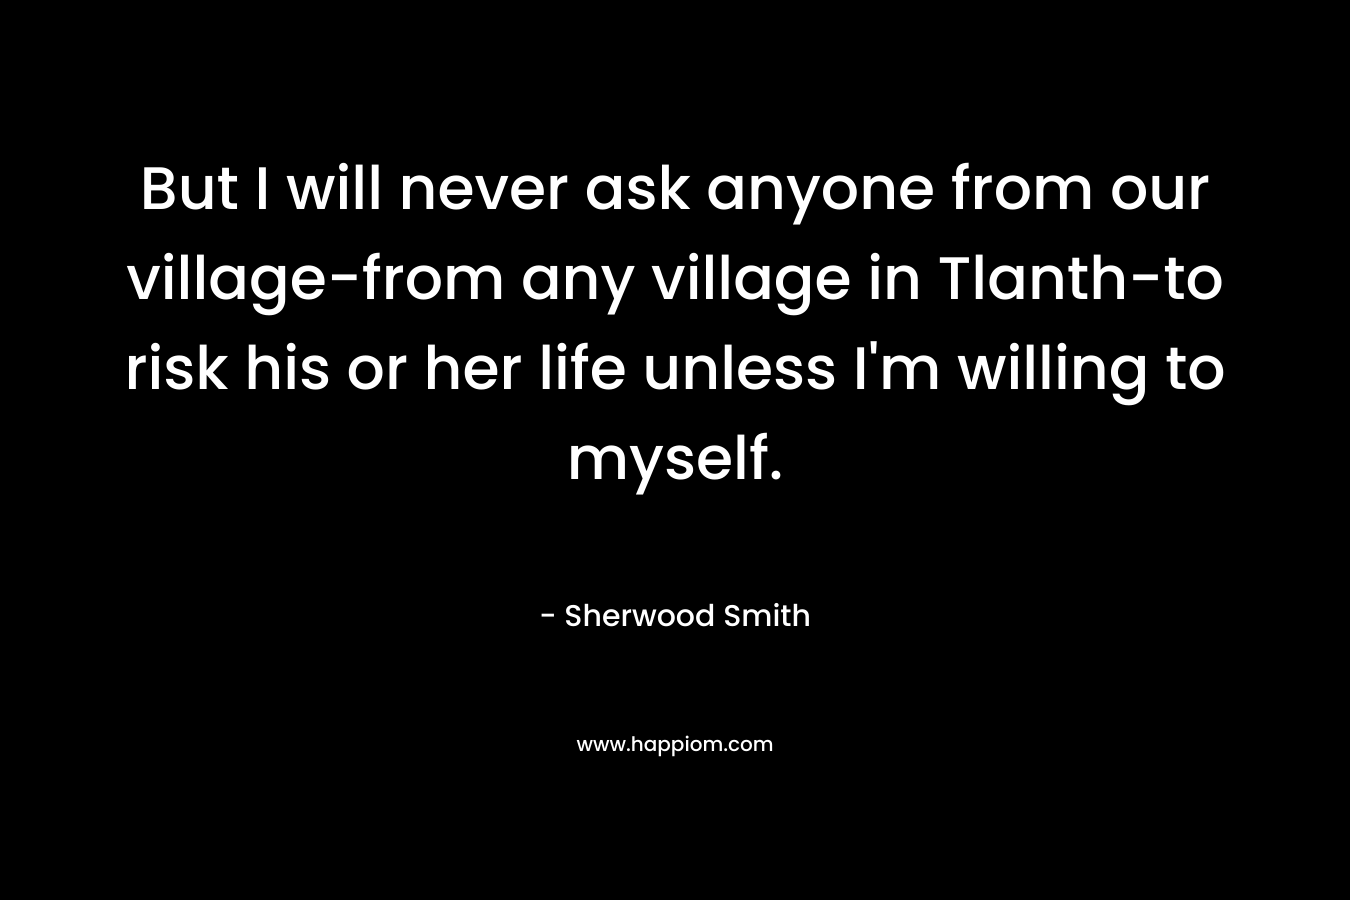 But I will never ask anyone from our village-from any village in Tlanth-to risk his or her life unless I’m willing to myself. – Sherwood Smith